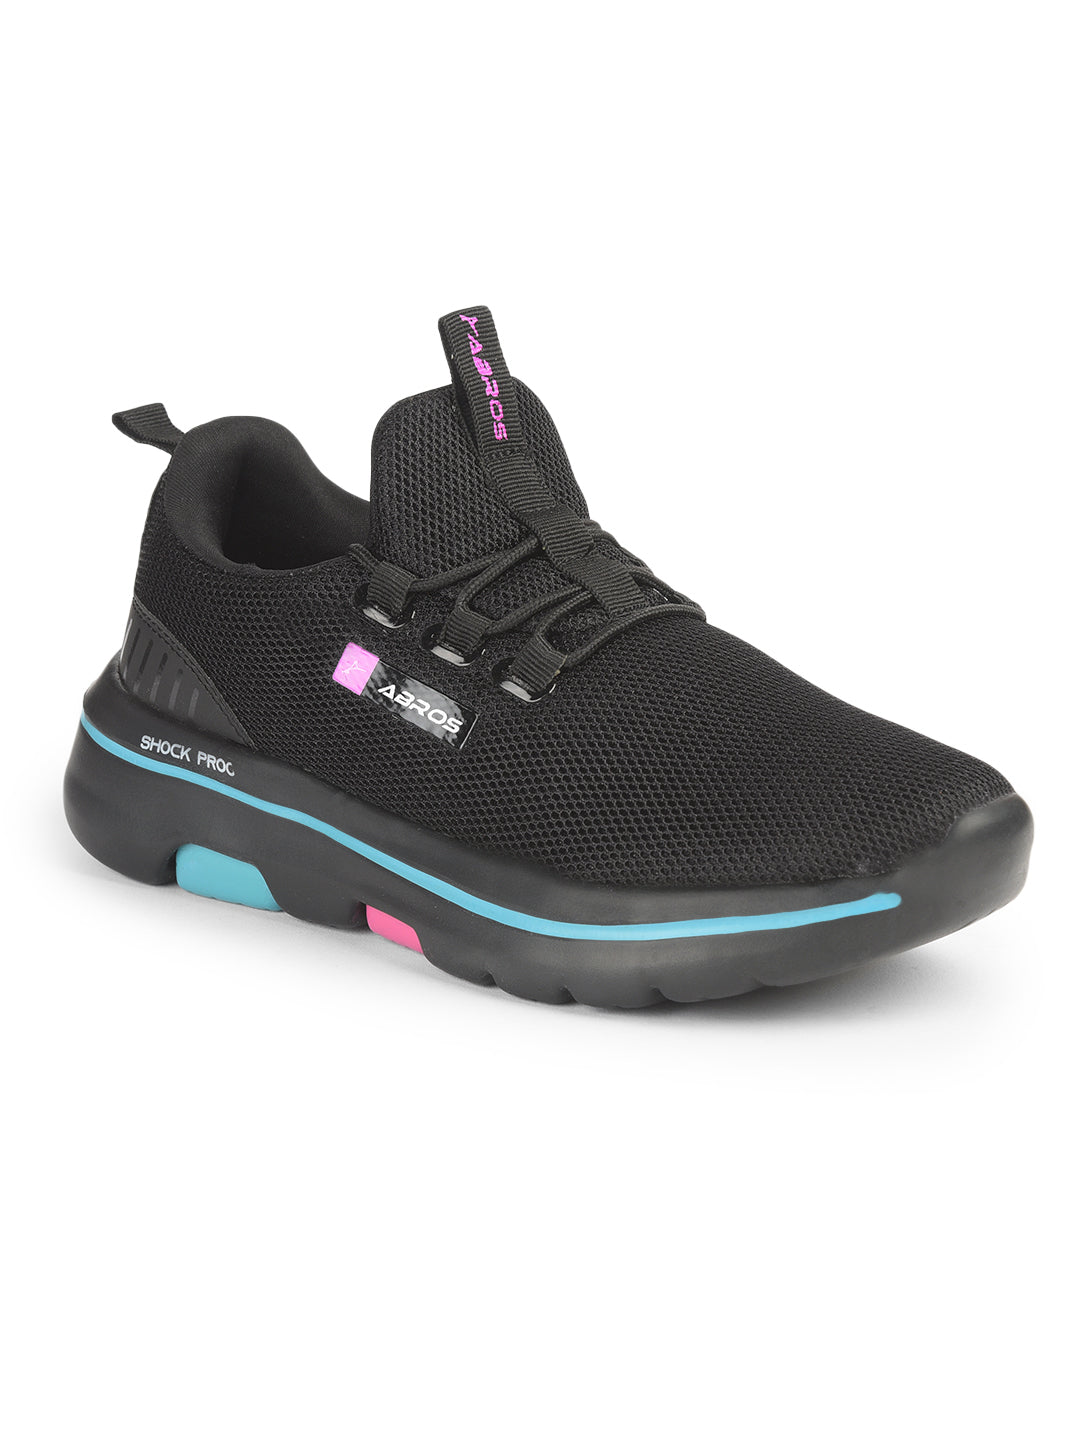 PANAMA SPORT-SHOES FOR LADIES